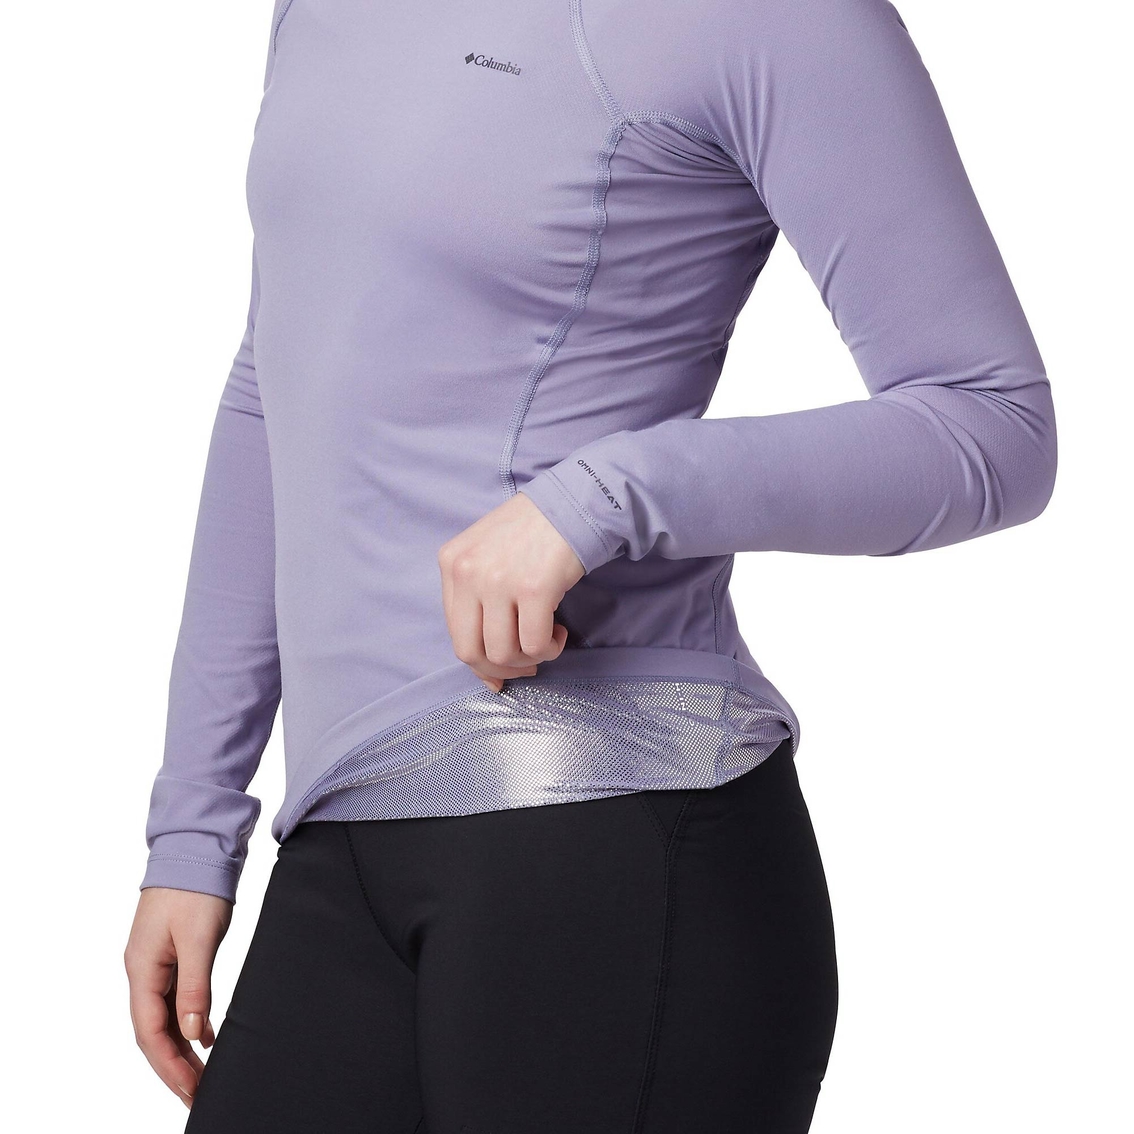 Columbia Midweight Stretch Long Sleeve Top - Image 3 of 3